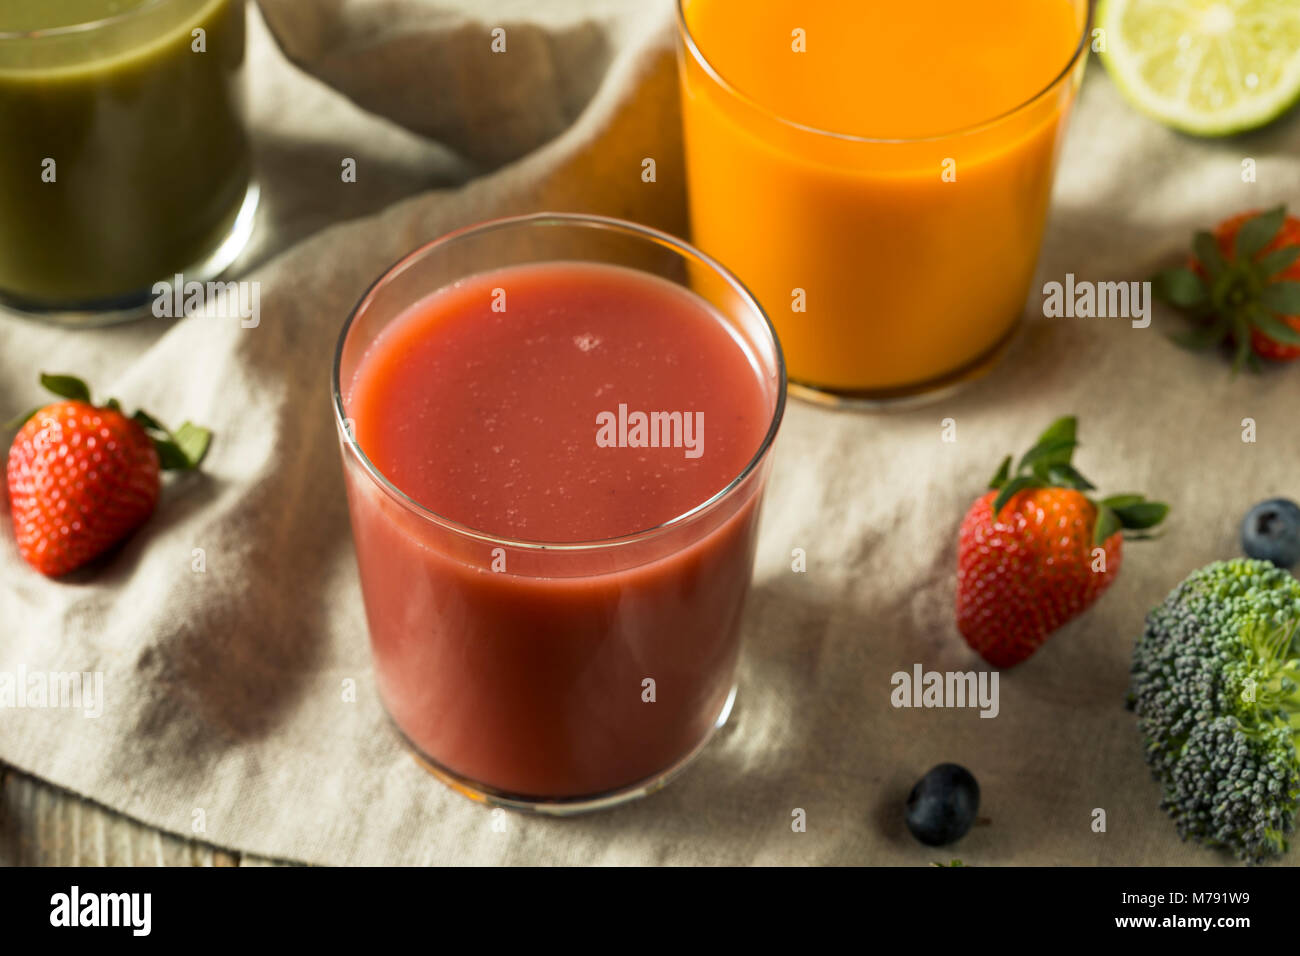 Raw Organic Healthy Detox Juices made from Fruit and Vegetables Stock Photo